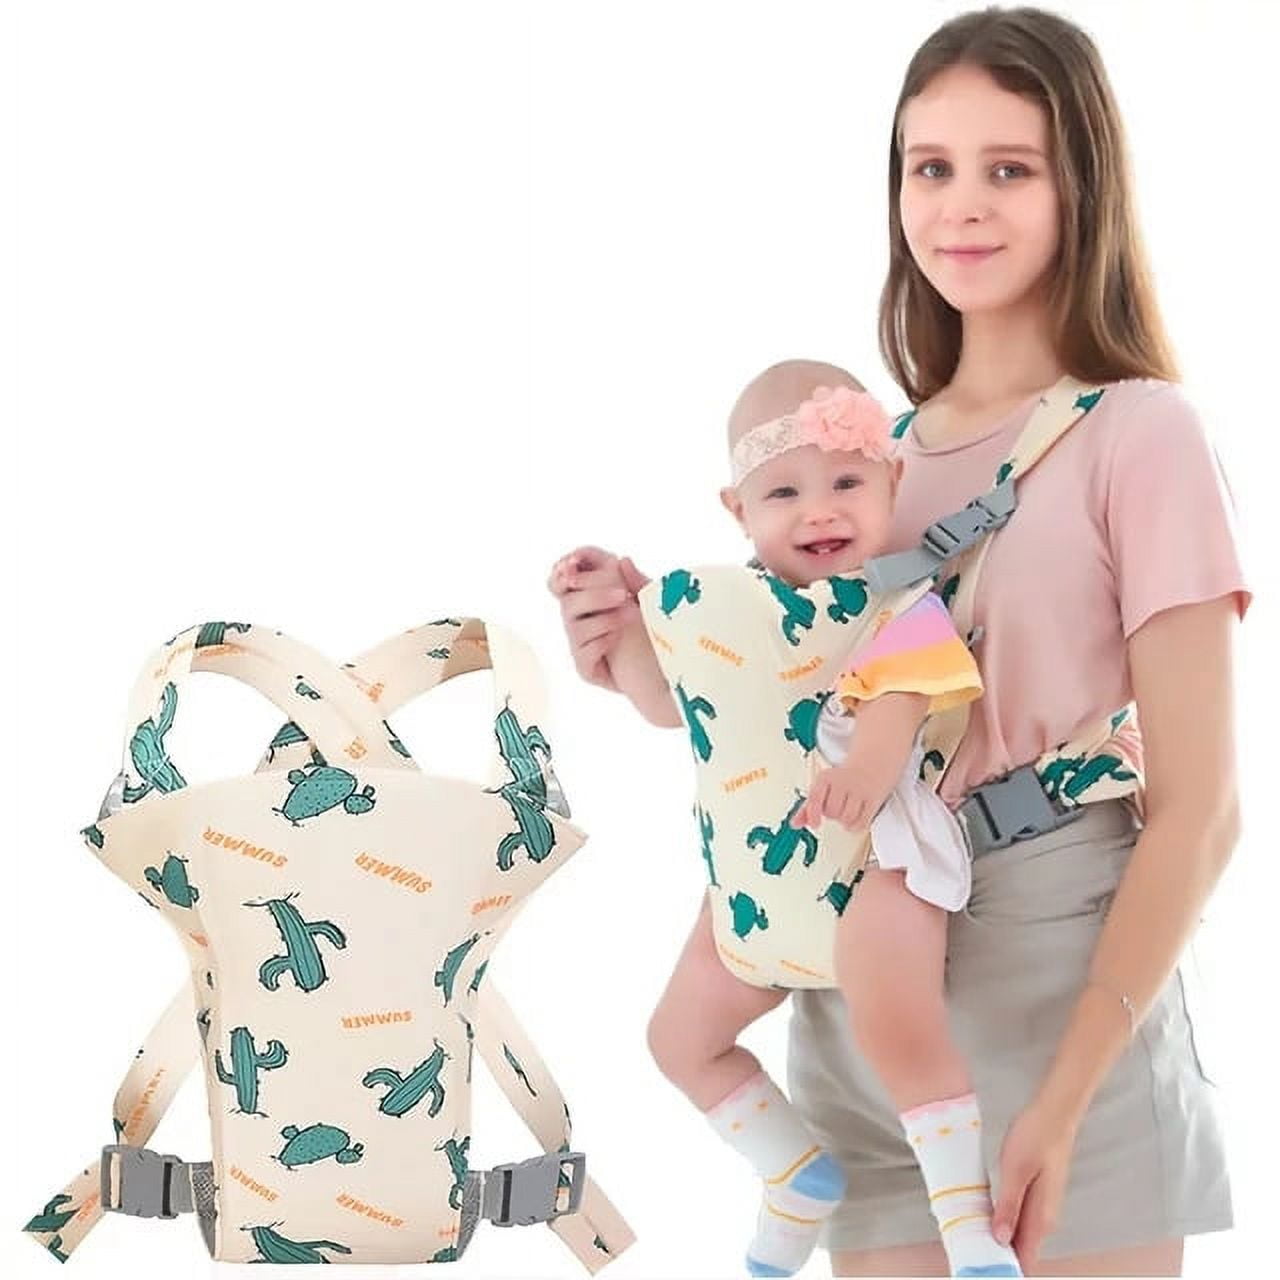 Babyltrl 4 in 1 Baby Carrier,Infant Carrier Ergonomic Baby Carrier Backpack,Breathable Front Back Carrying Wrap Seat for Newborn Toddlers Girl and Boy,Colorful - image 1 of 11